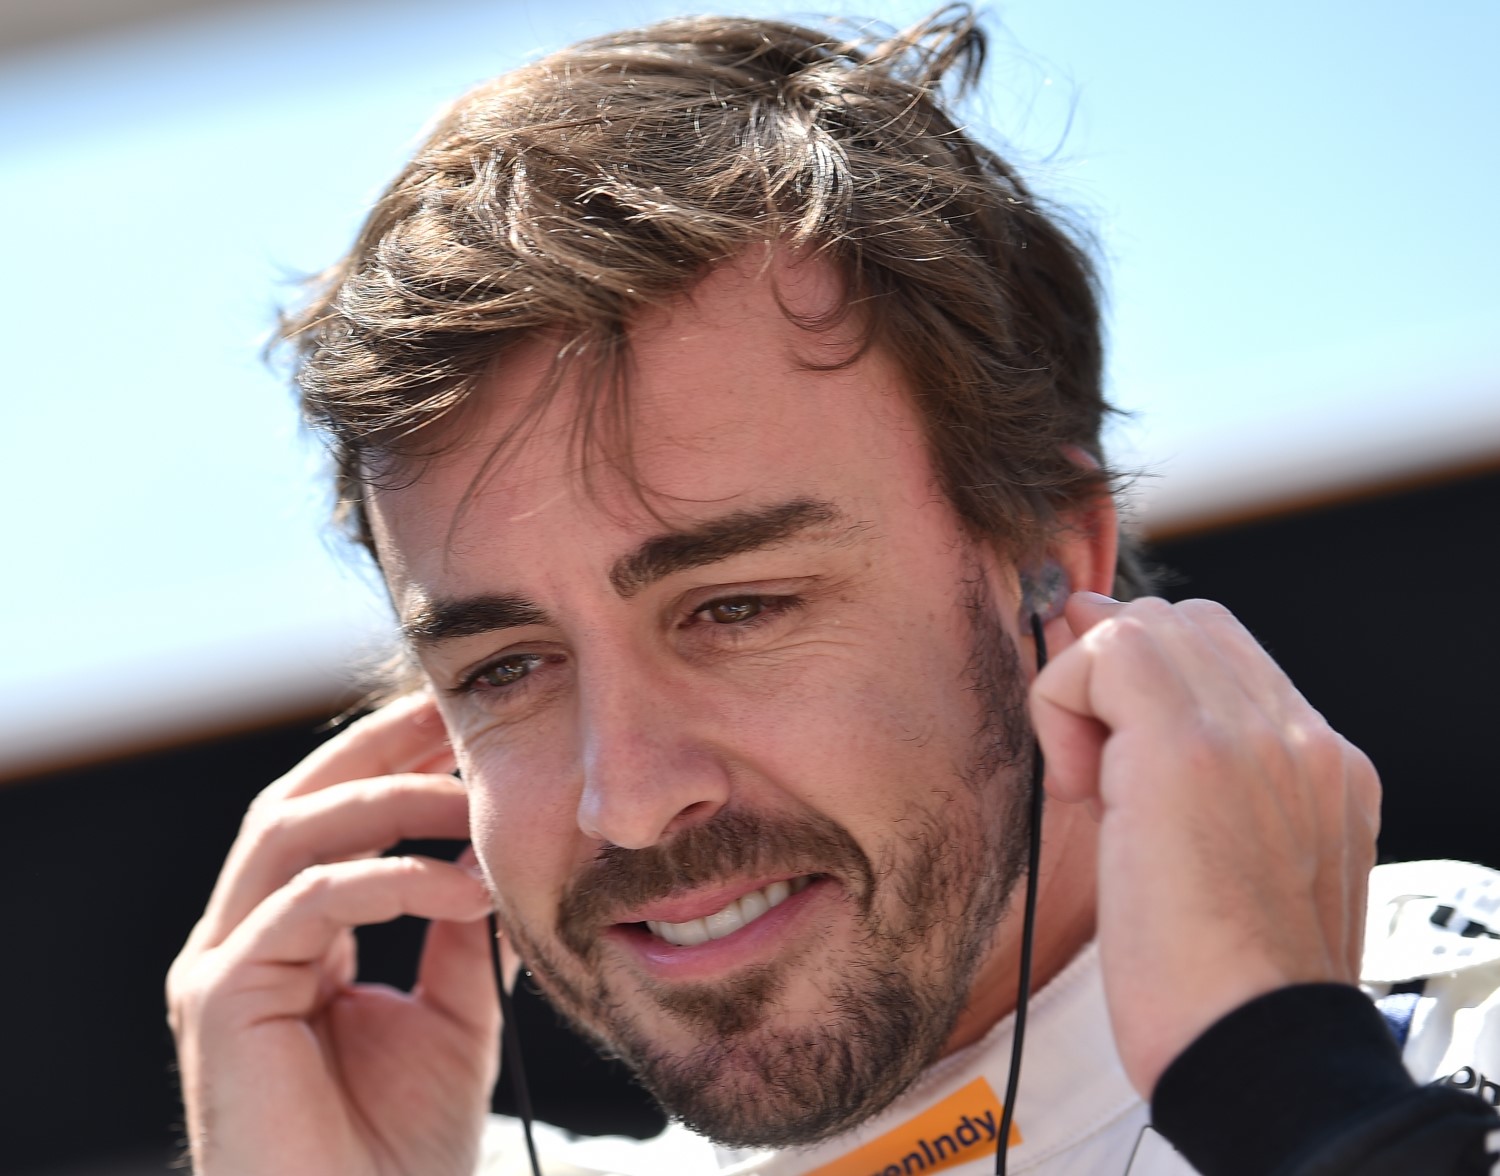 Alonso got more worldwide publicity for the Indy 500 than the remaining 32 drivers combined